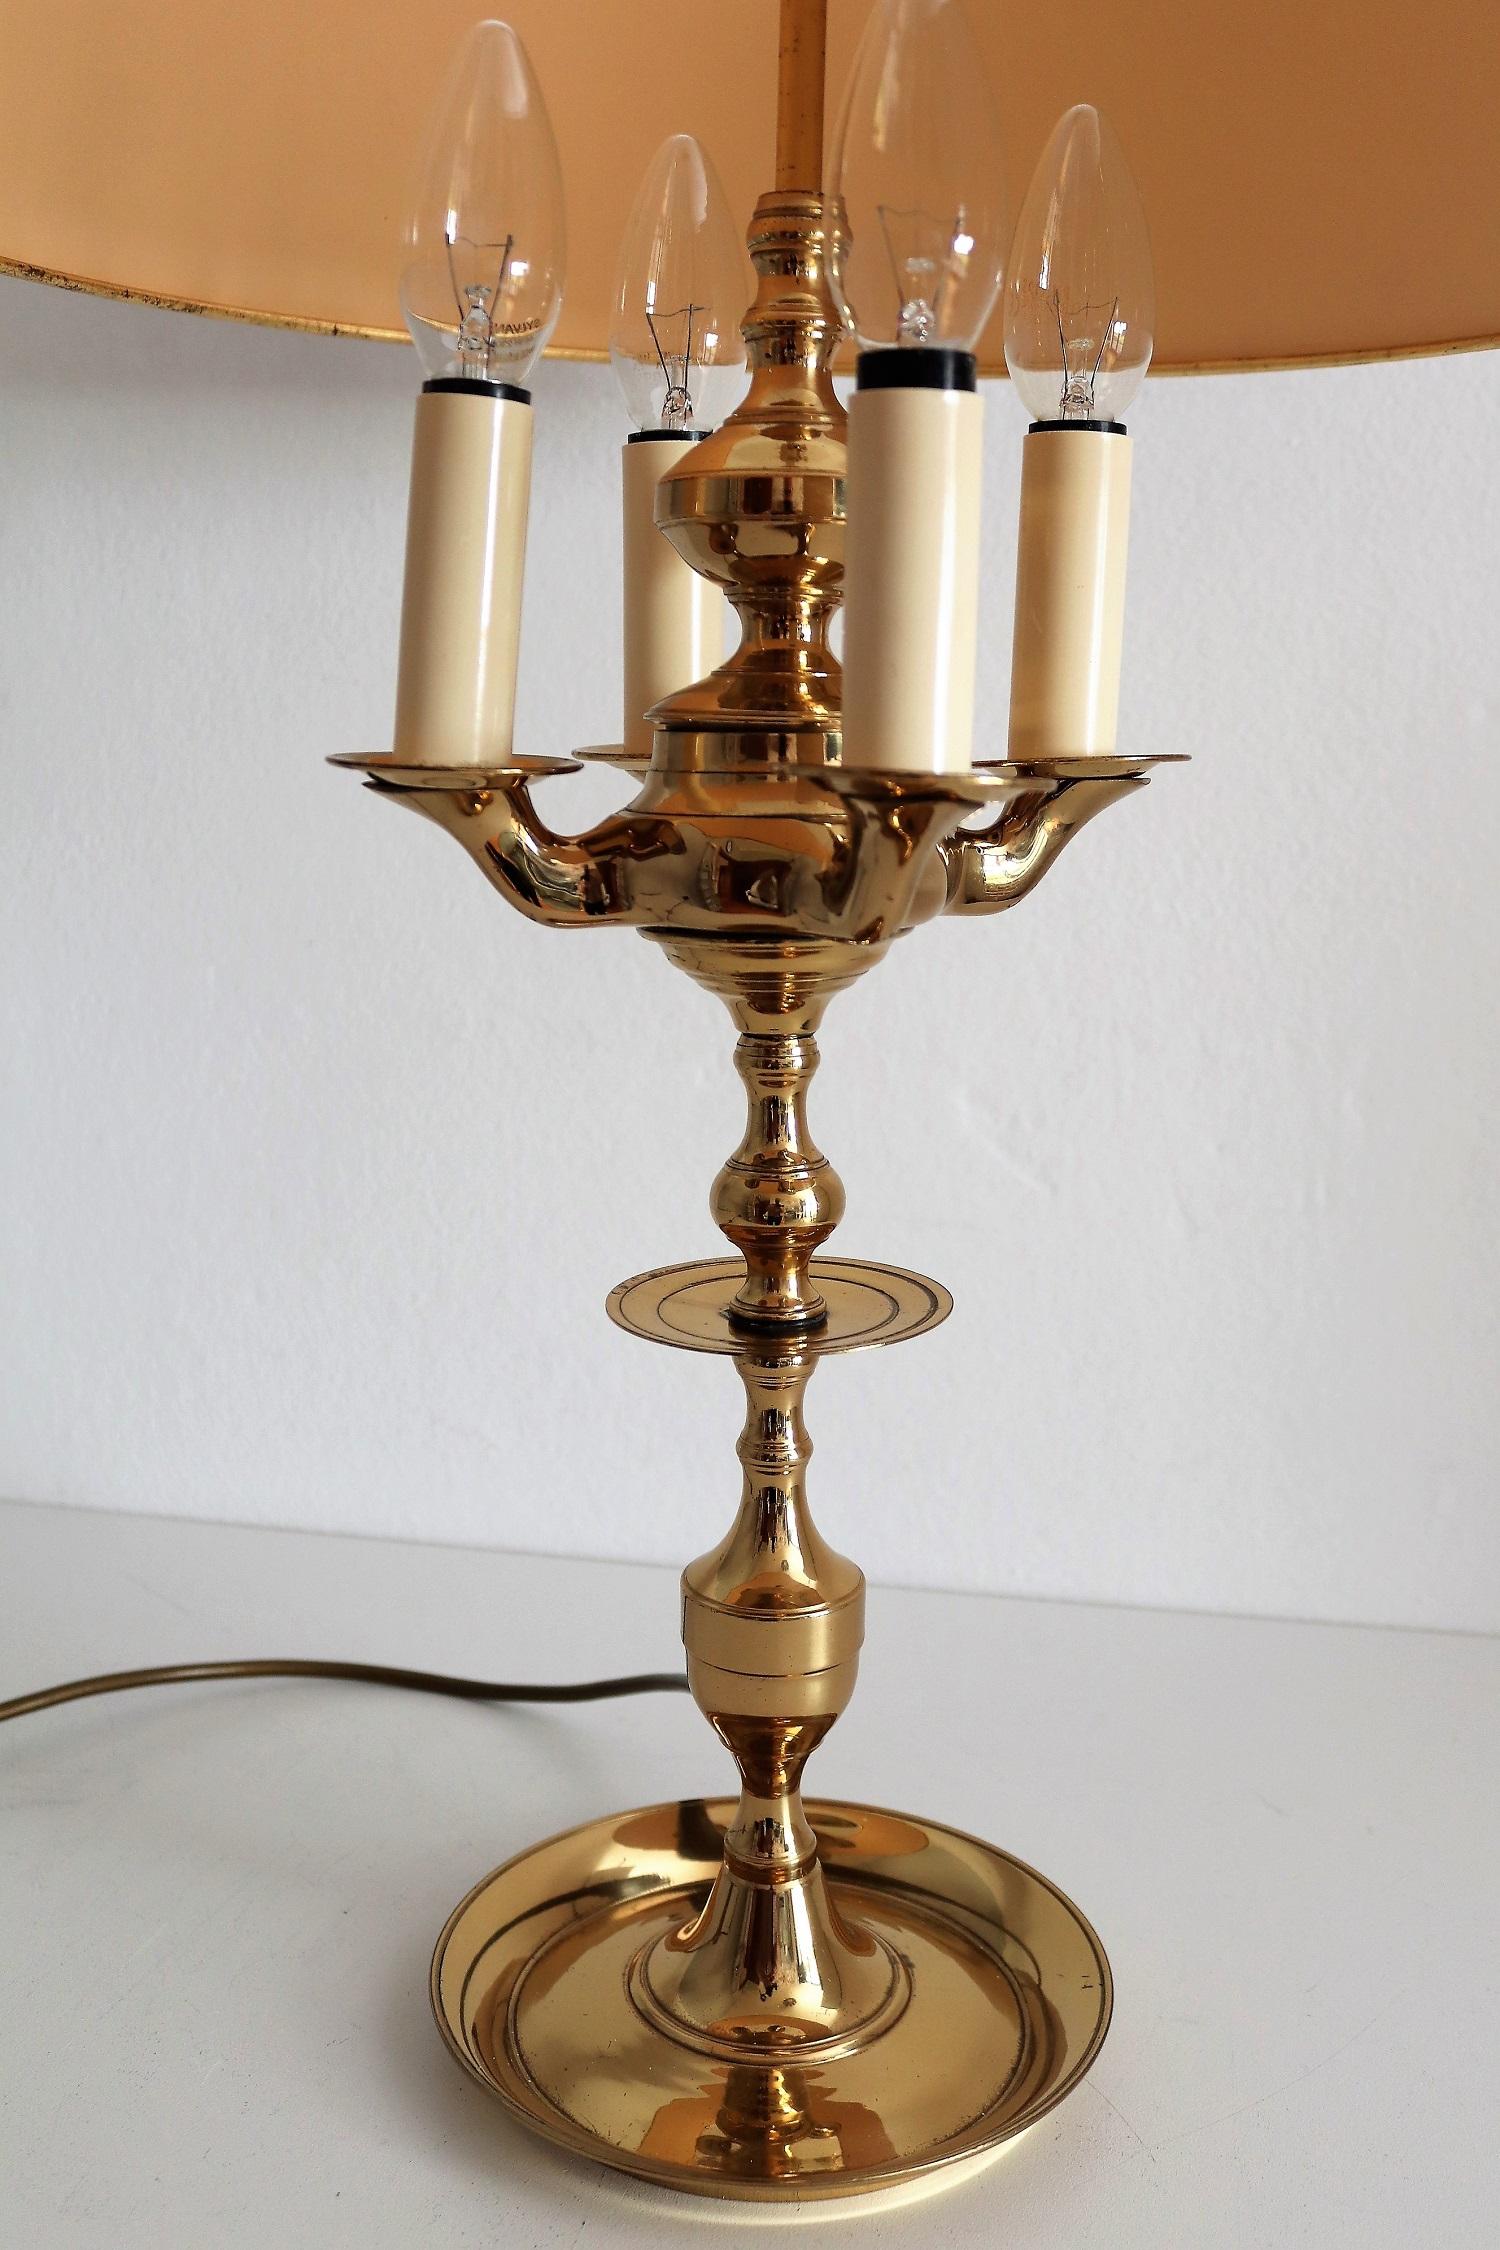 German Midcentury Four-Arm Brass Bouillotte Table Lamp in Louis XVI Style, 1950s